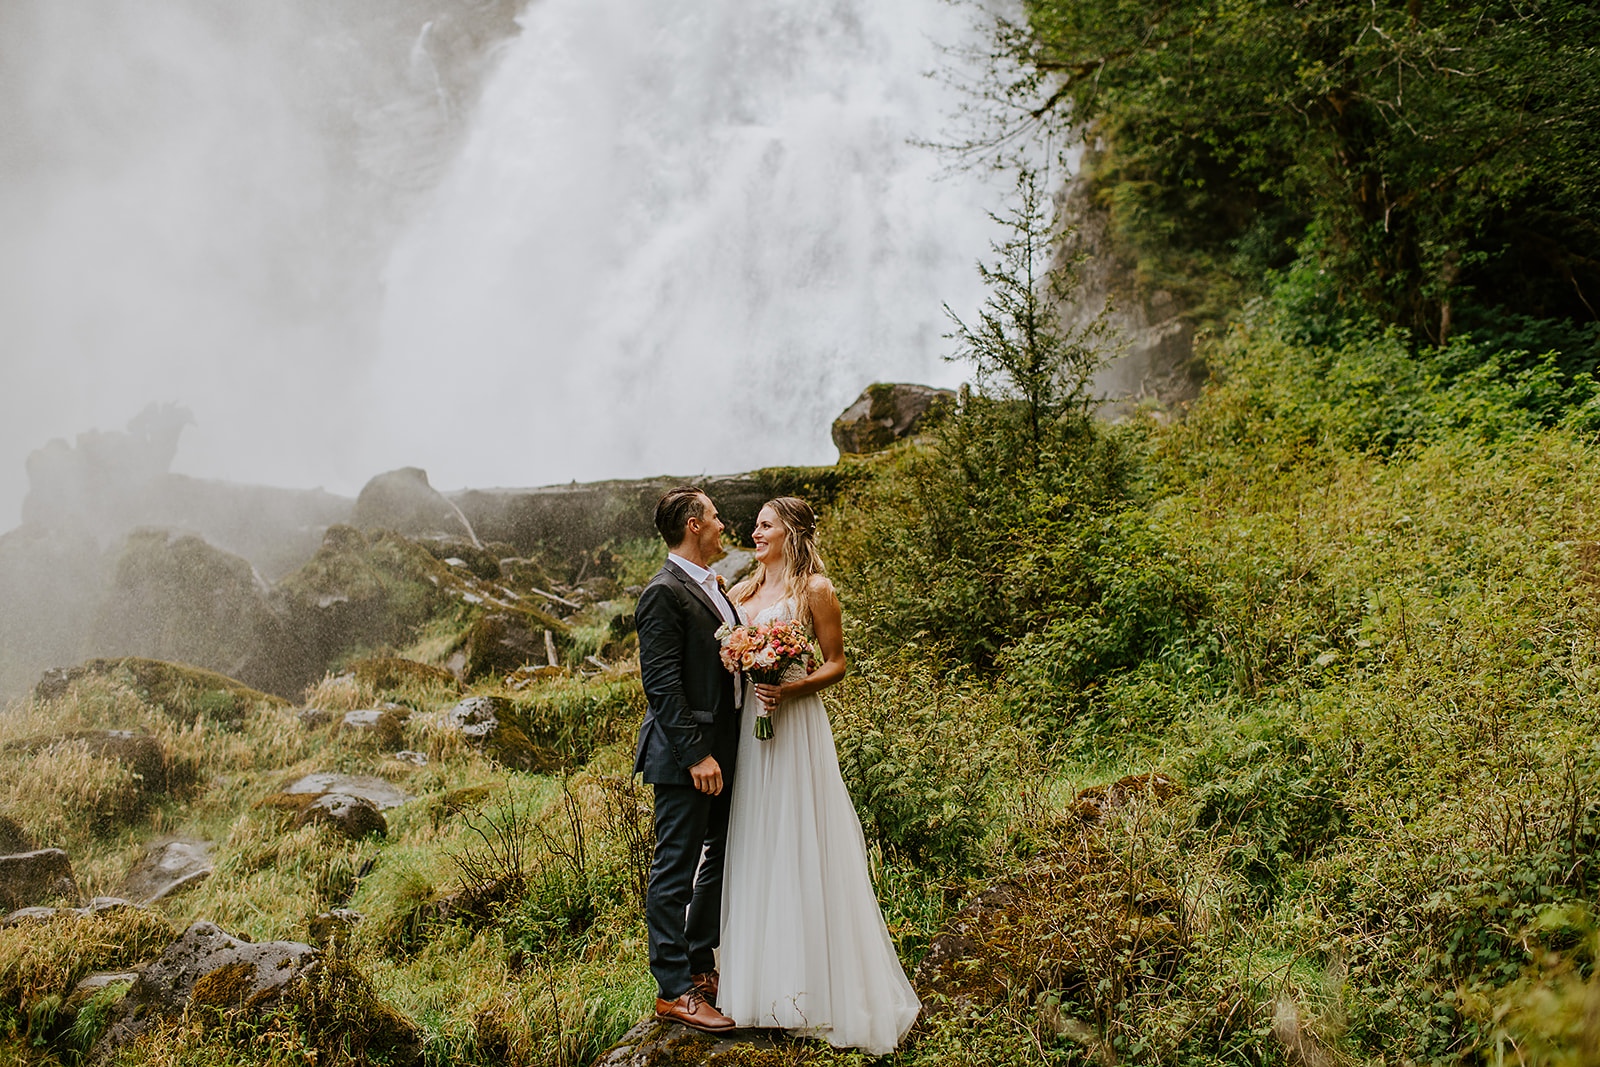 Adventure elopement couple in front of Chatter box falls